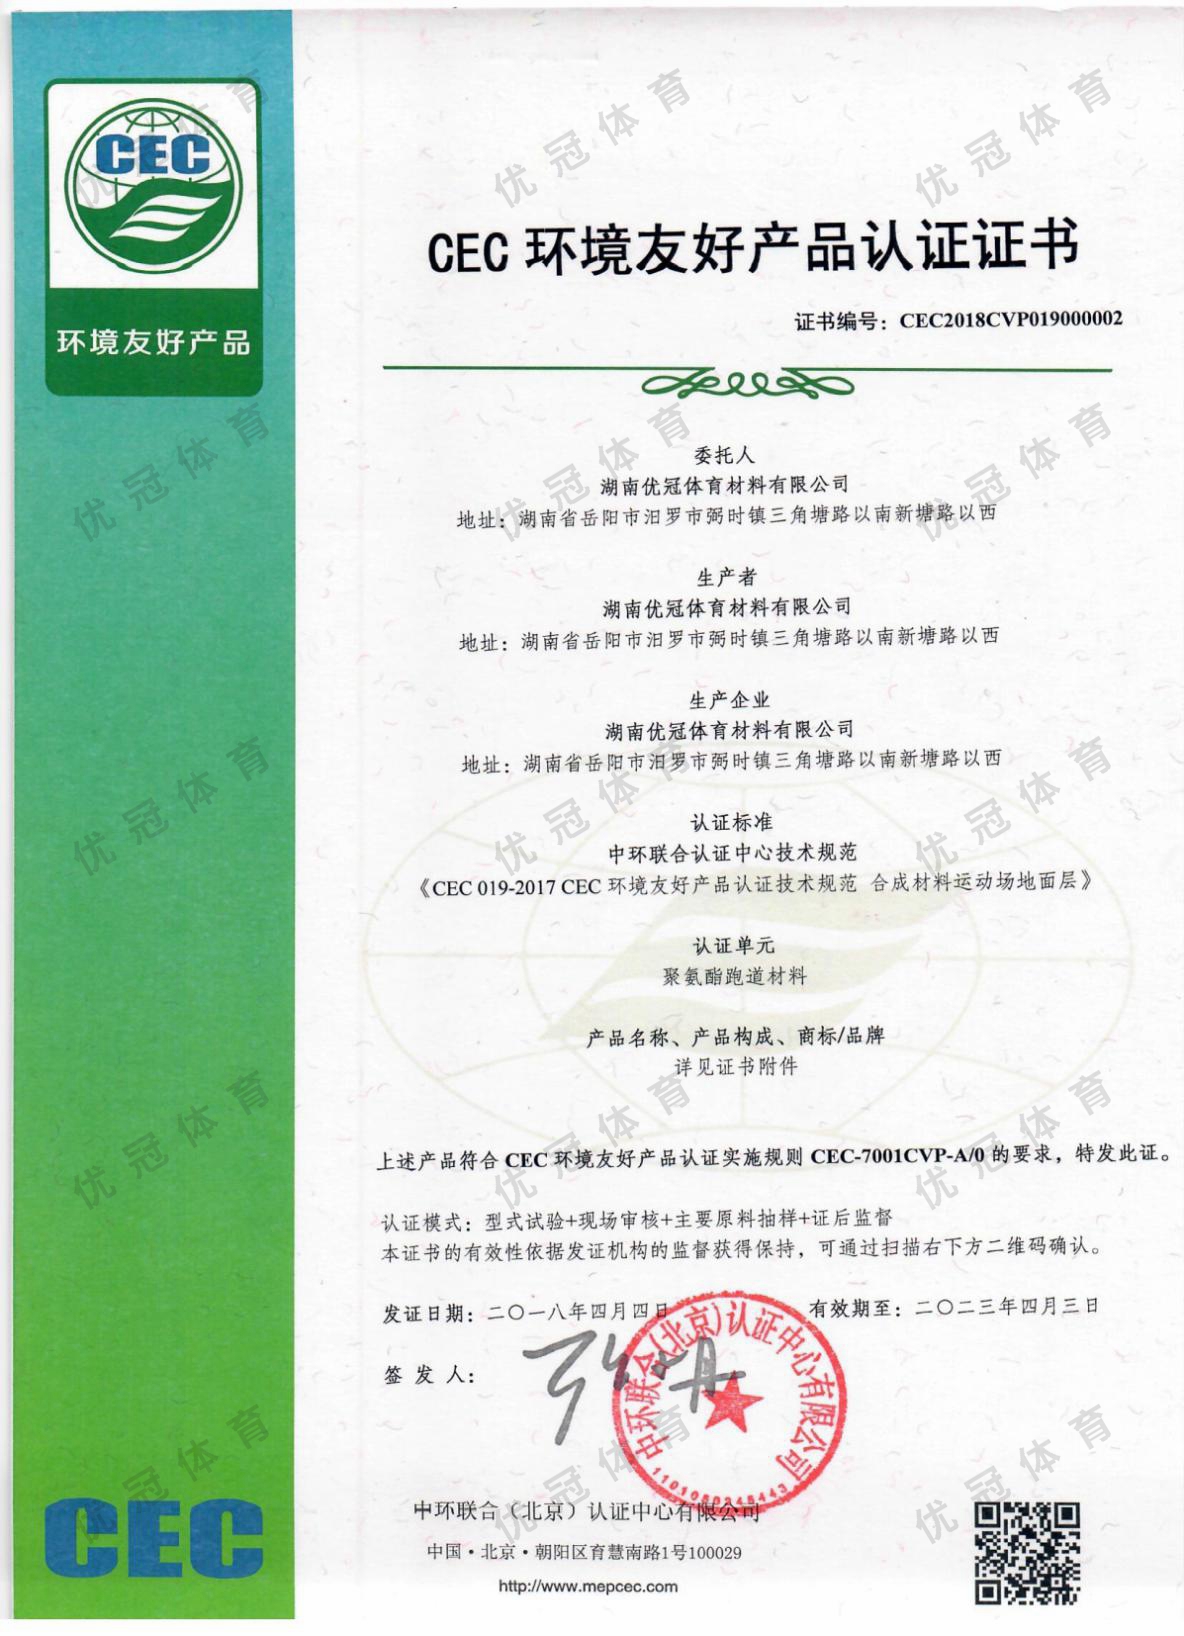 CEC Certification of Environment-friendly Products (Materials for Synthetic Tracks)